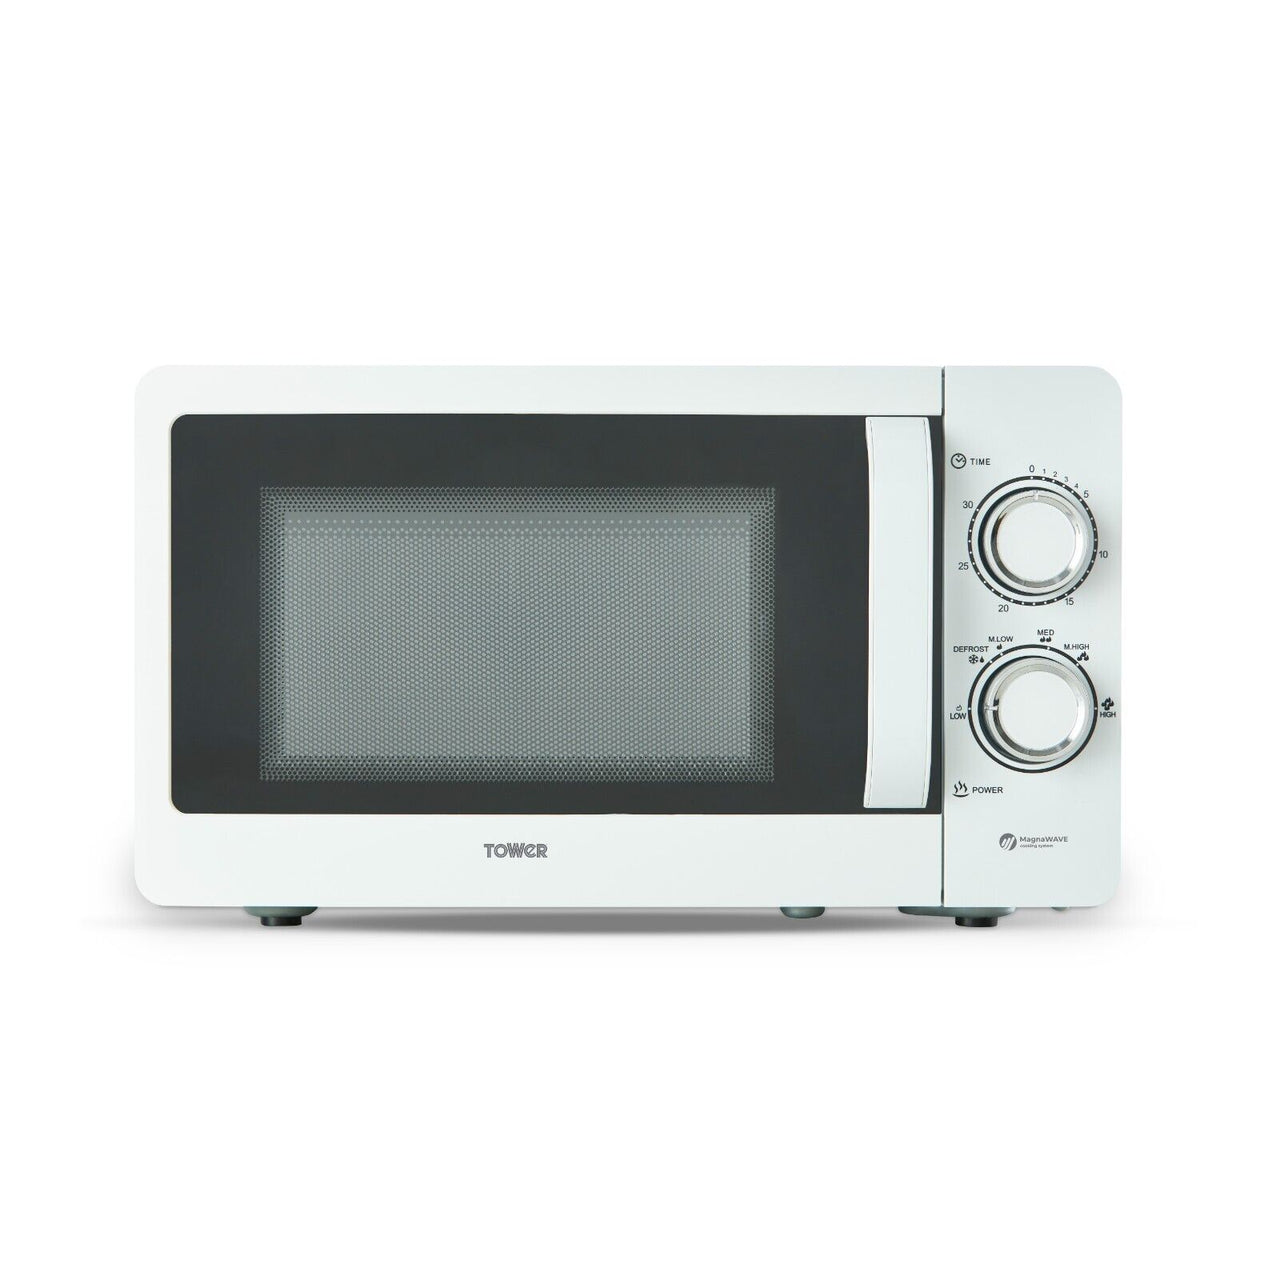 Tower White 800W 20L Manual Microwave T24042WHT - New with 3 Year Guarantee